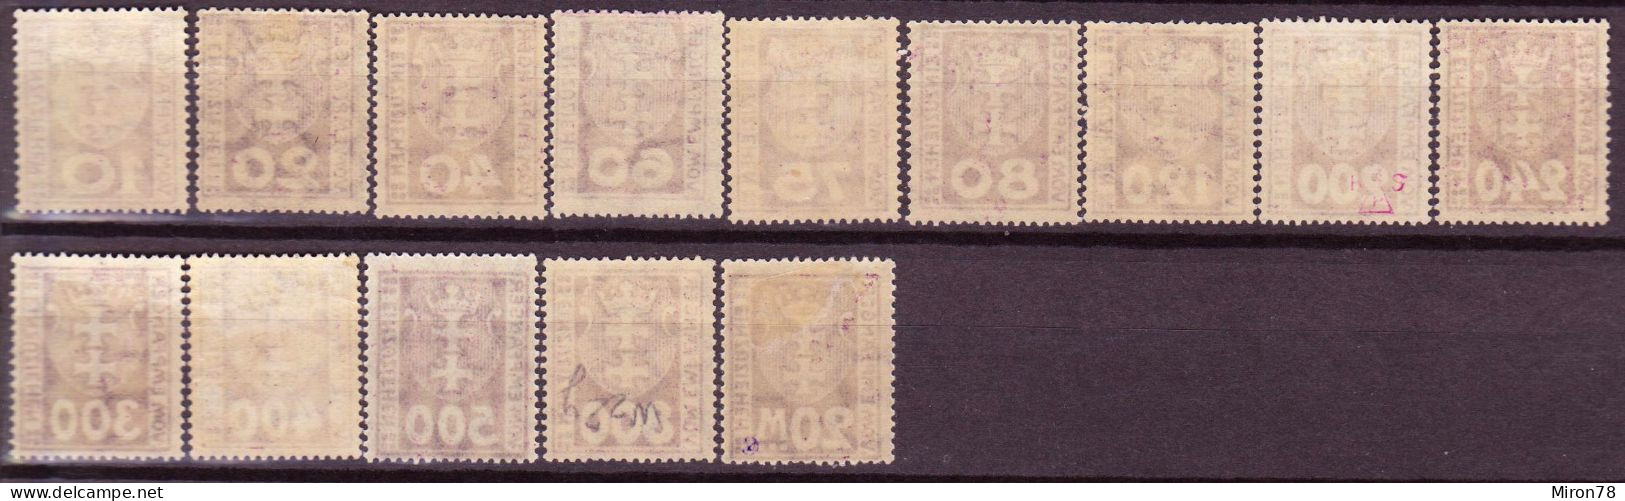 Stamps Danzig 1923 POSTAGE DUE STAMPS Mint MNH Lot6 - Impuestos